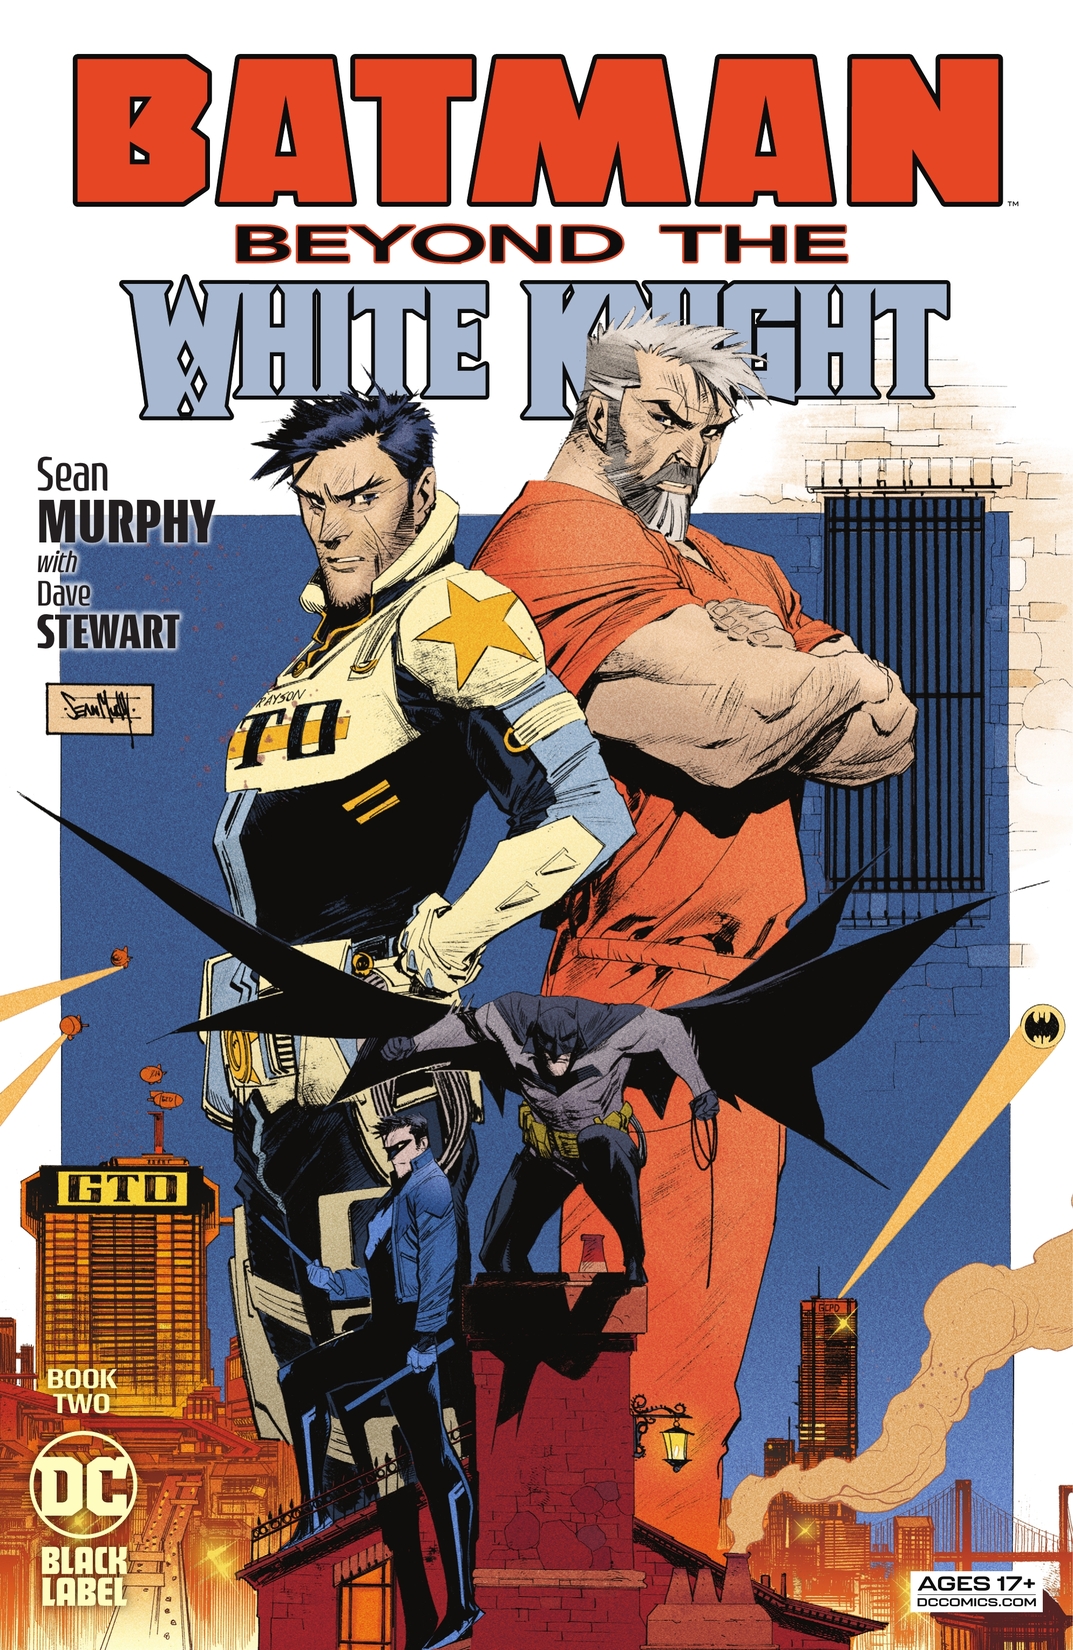 Batman: Beyond the White Knight #2 preview images